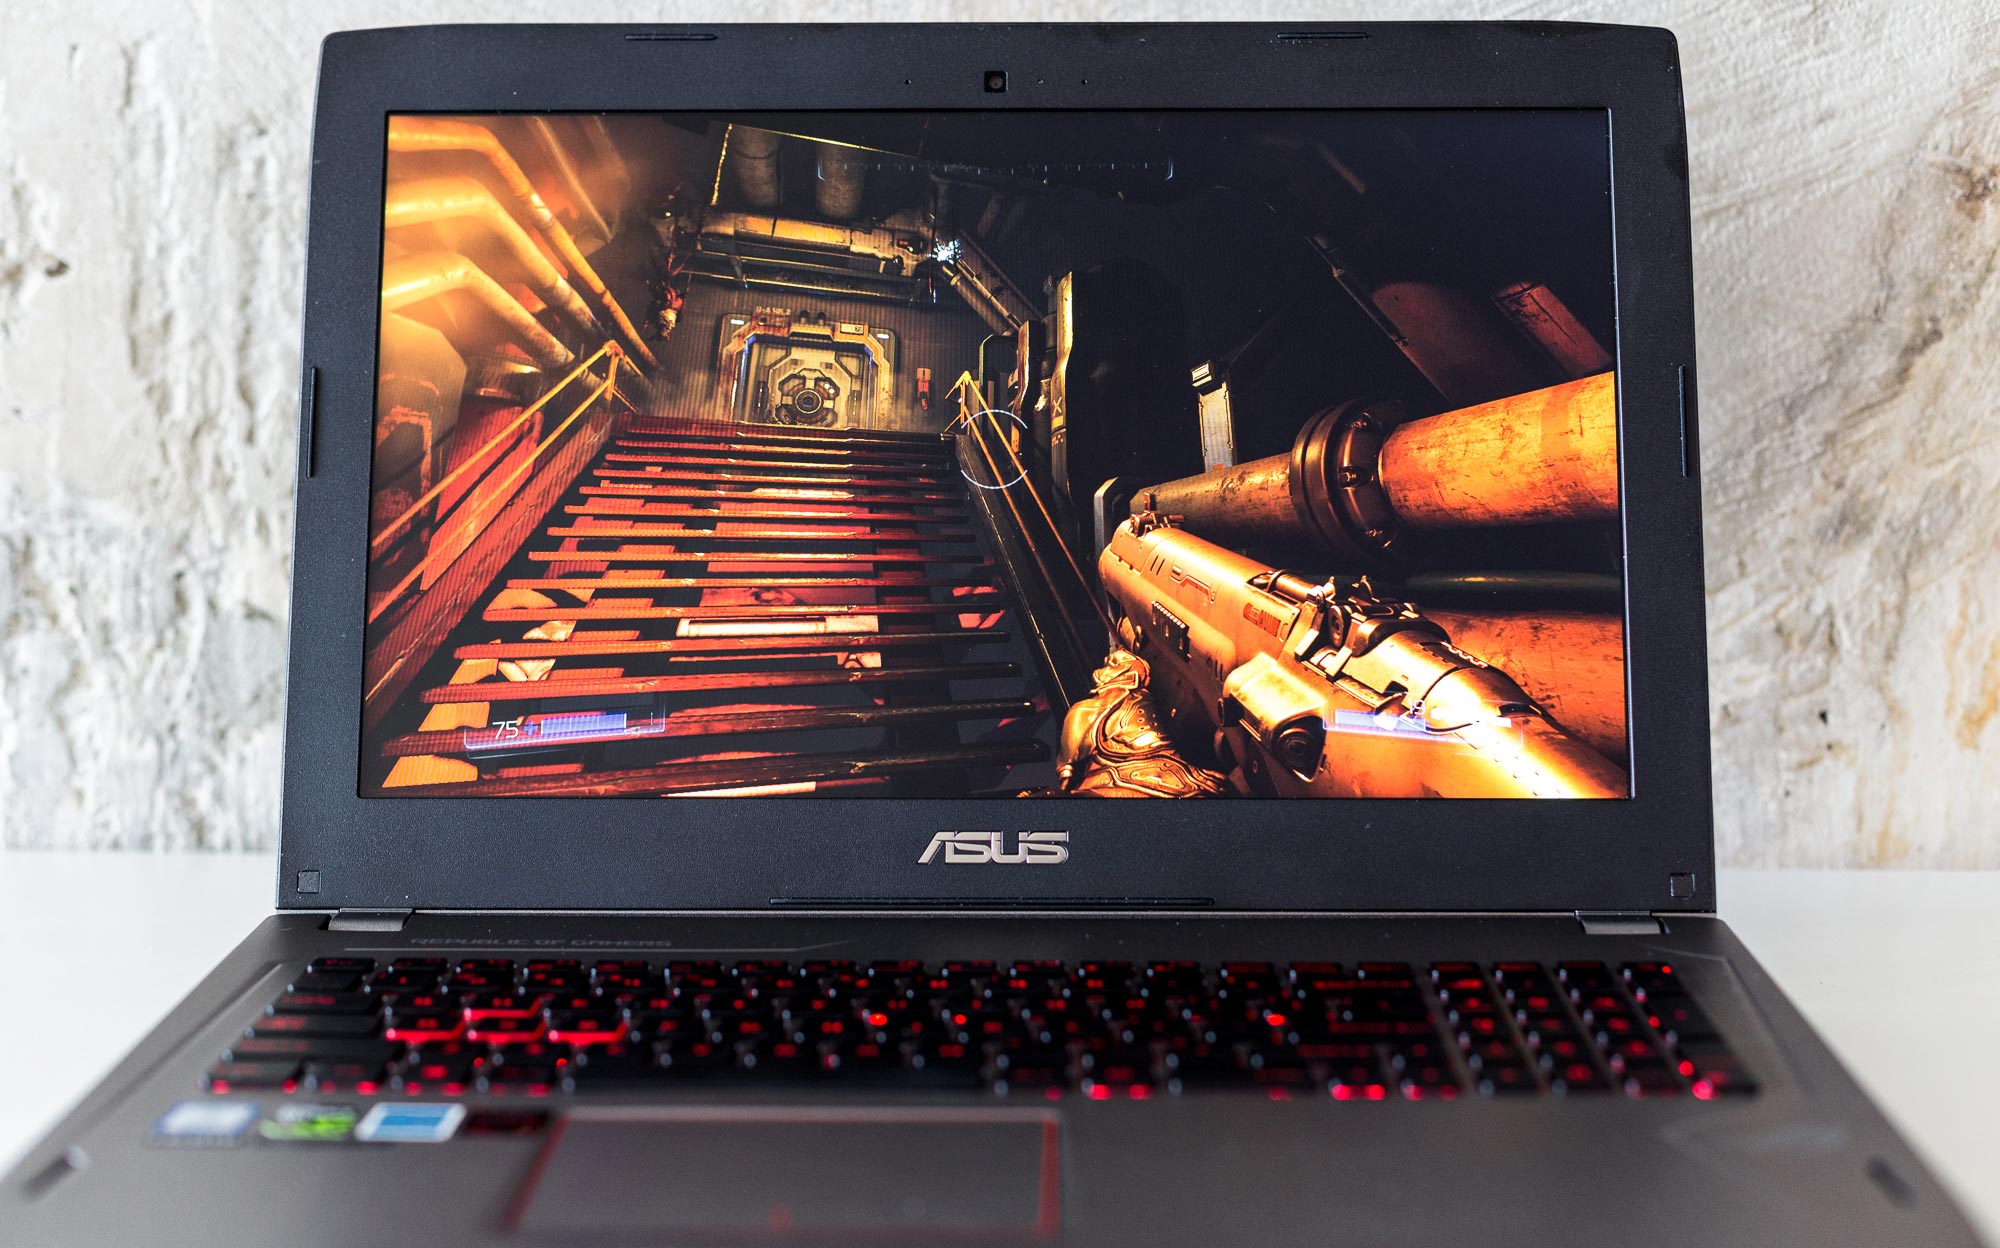 Gaming around the world with the ROG Strix GL502VS laptop